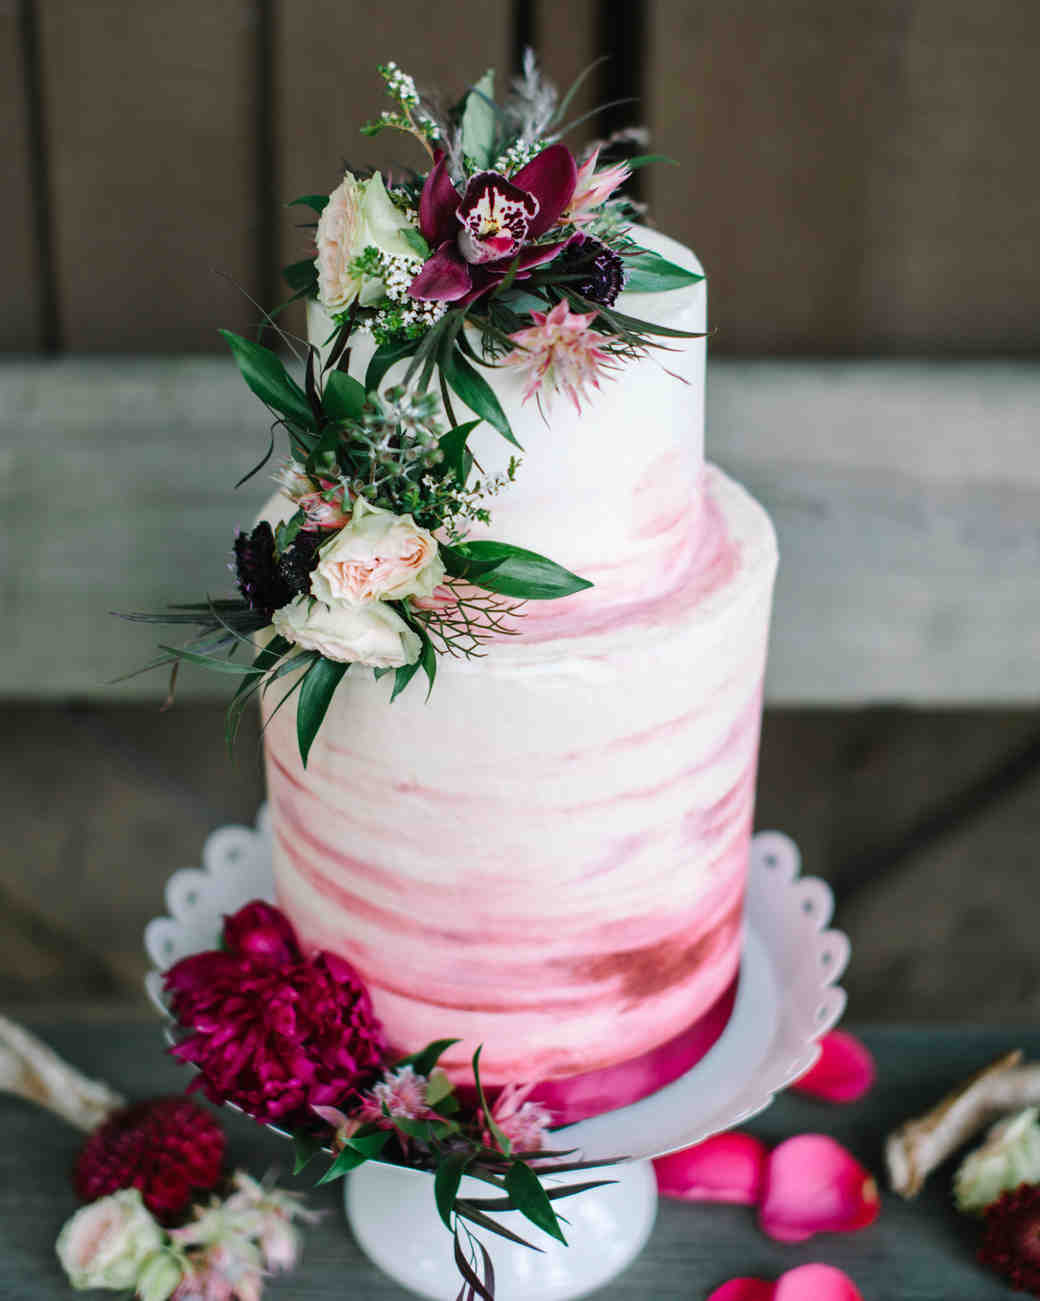 The Prettiest Ombré Wedding Cakes for Couples Who Love